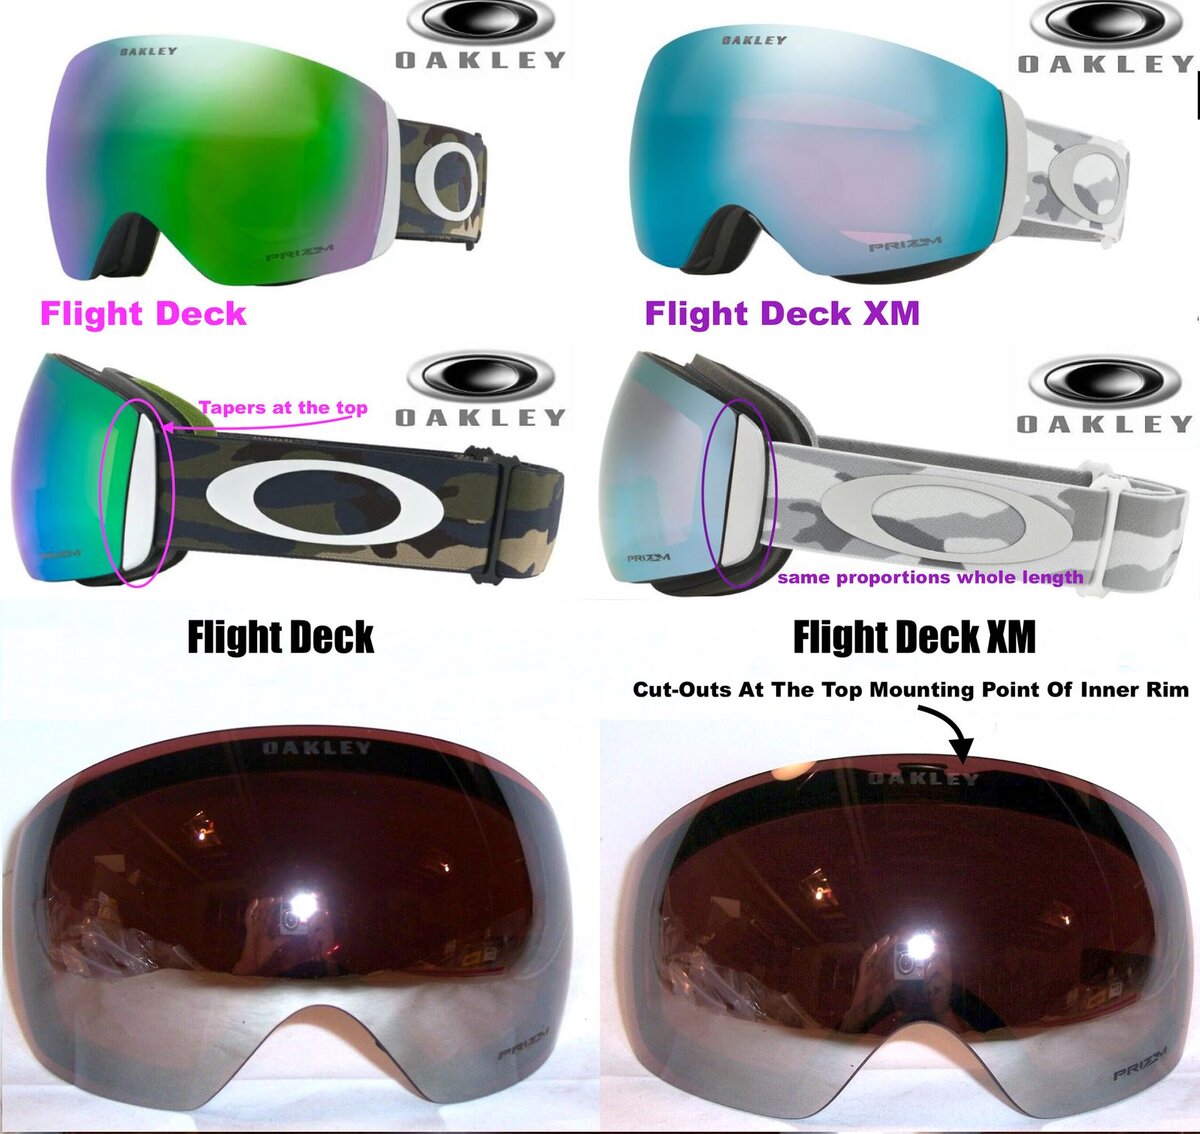 How to tell if you have a Deck or Flight XM | Oakley